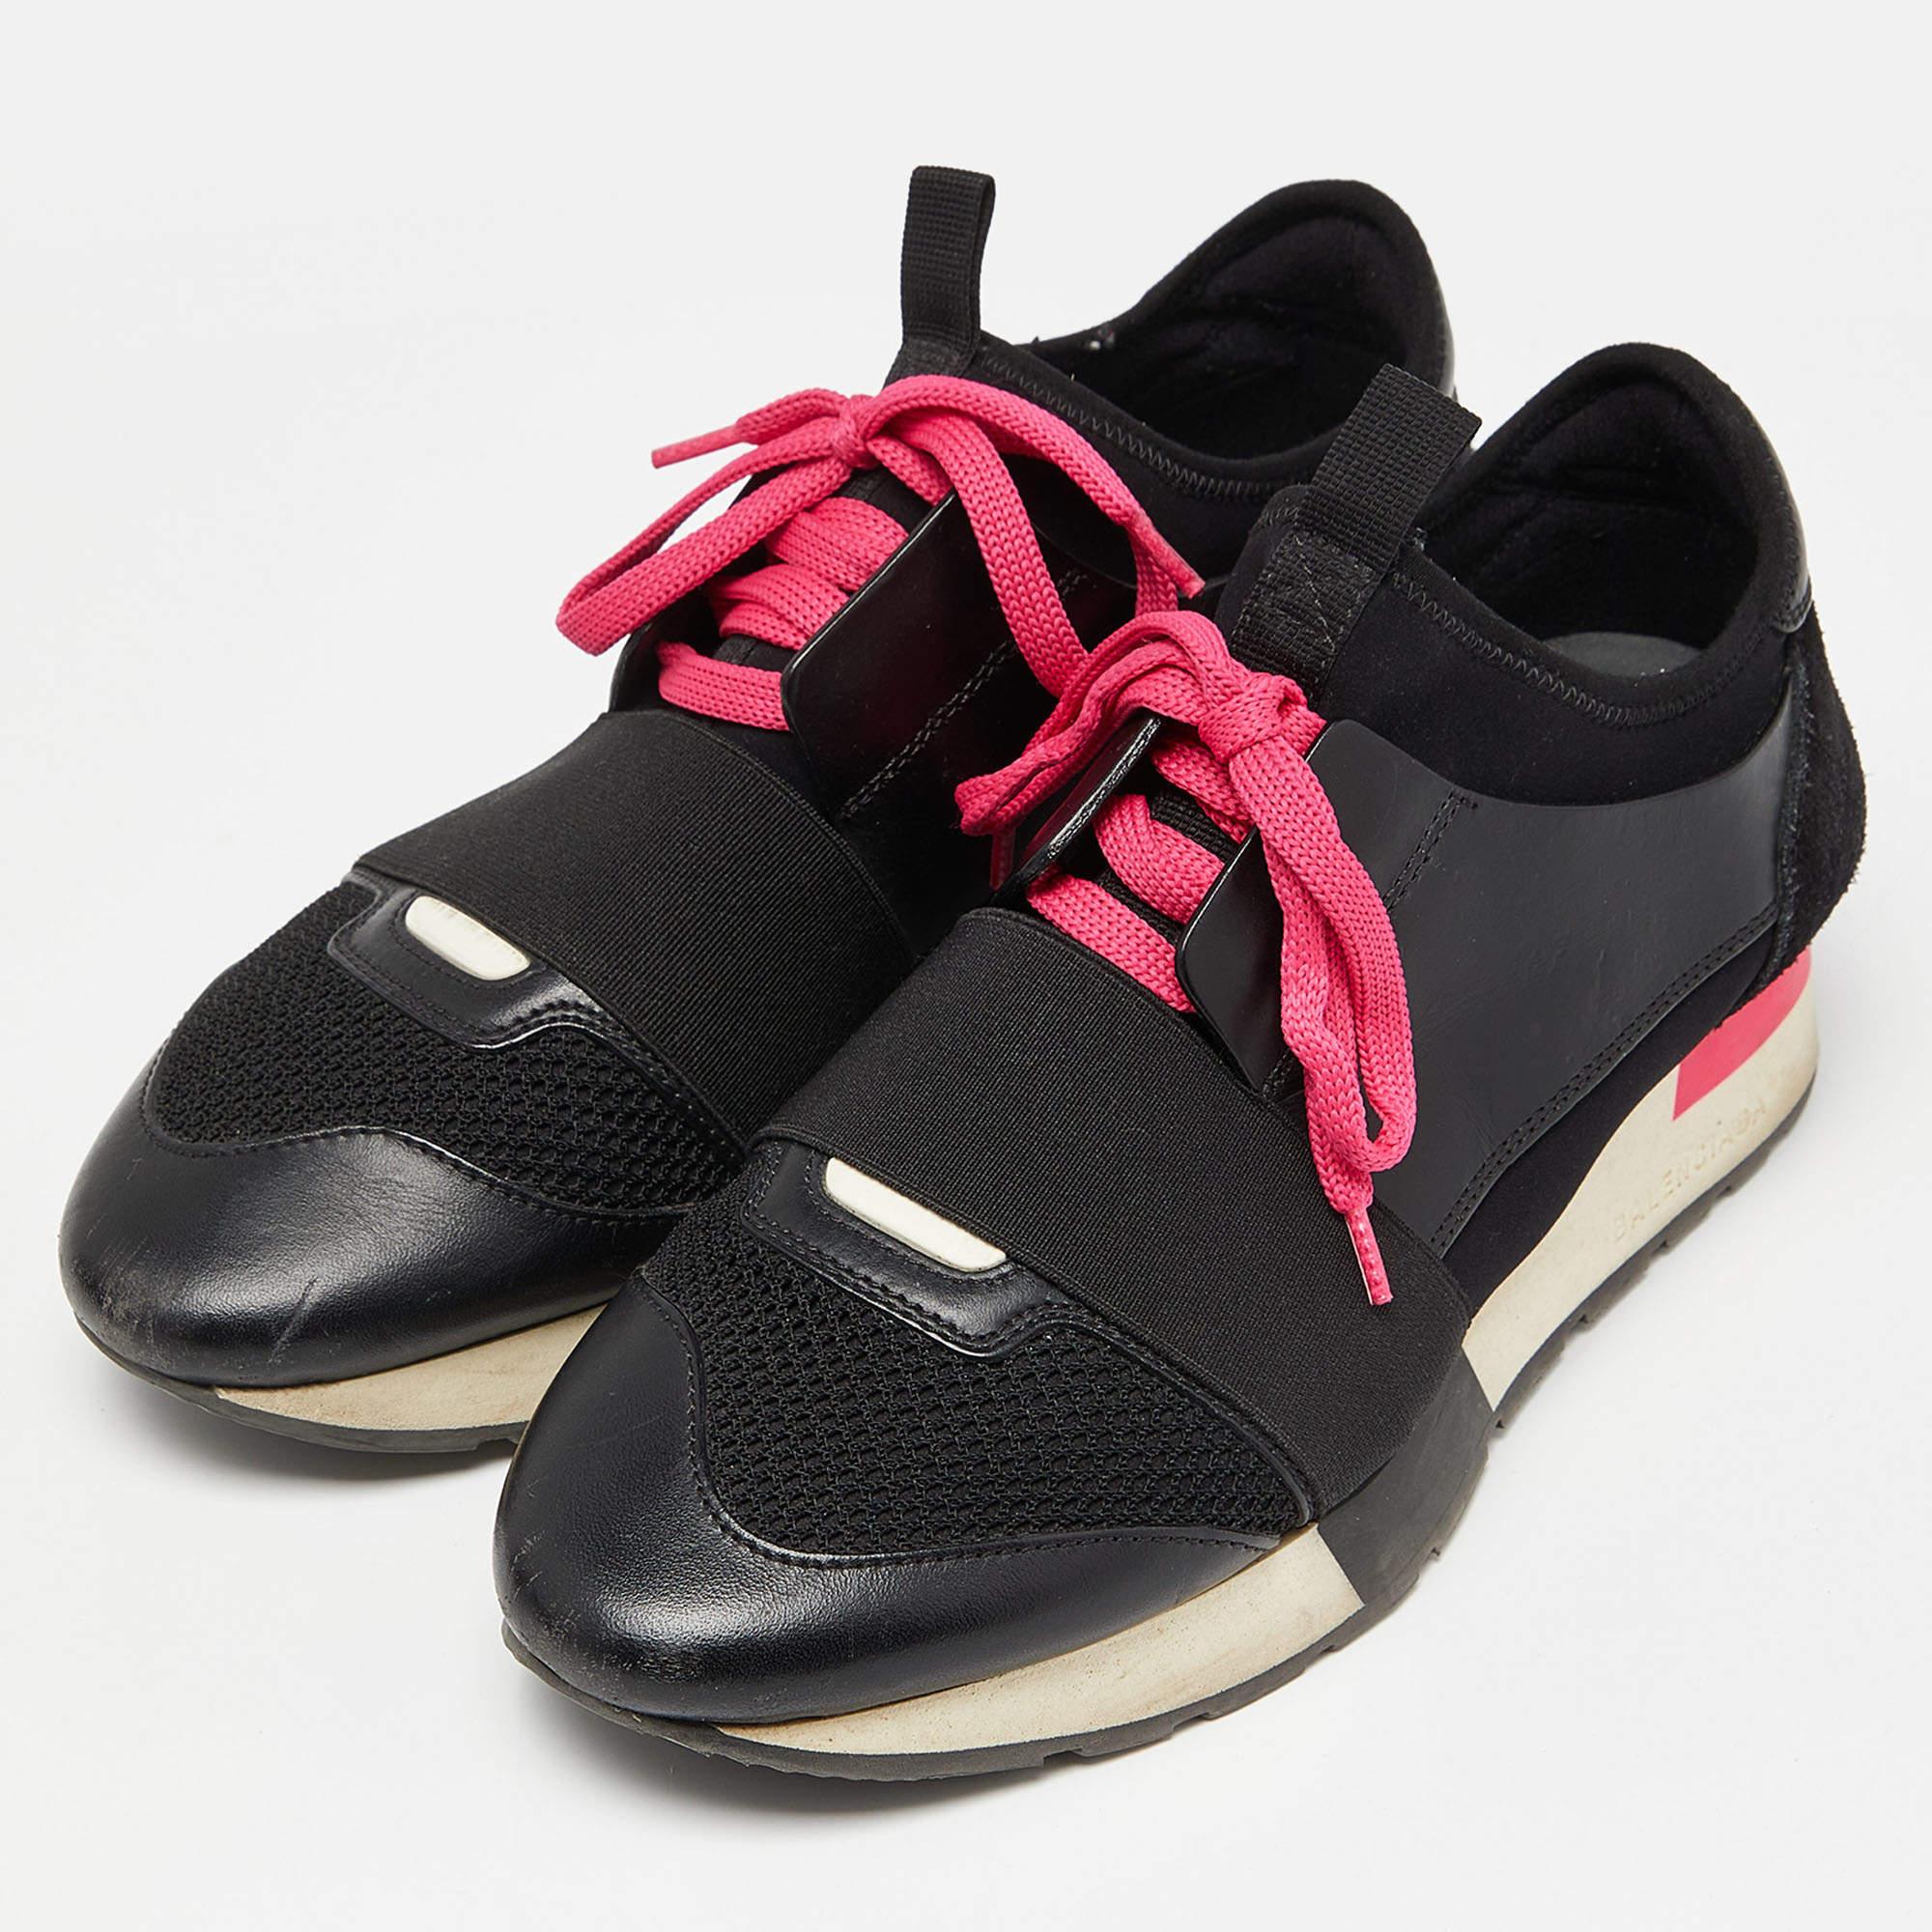 Balenciaga Black/Pink Leather, Suede and Mesh Race Runner Sneakers Size 37 For Sale 4